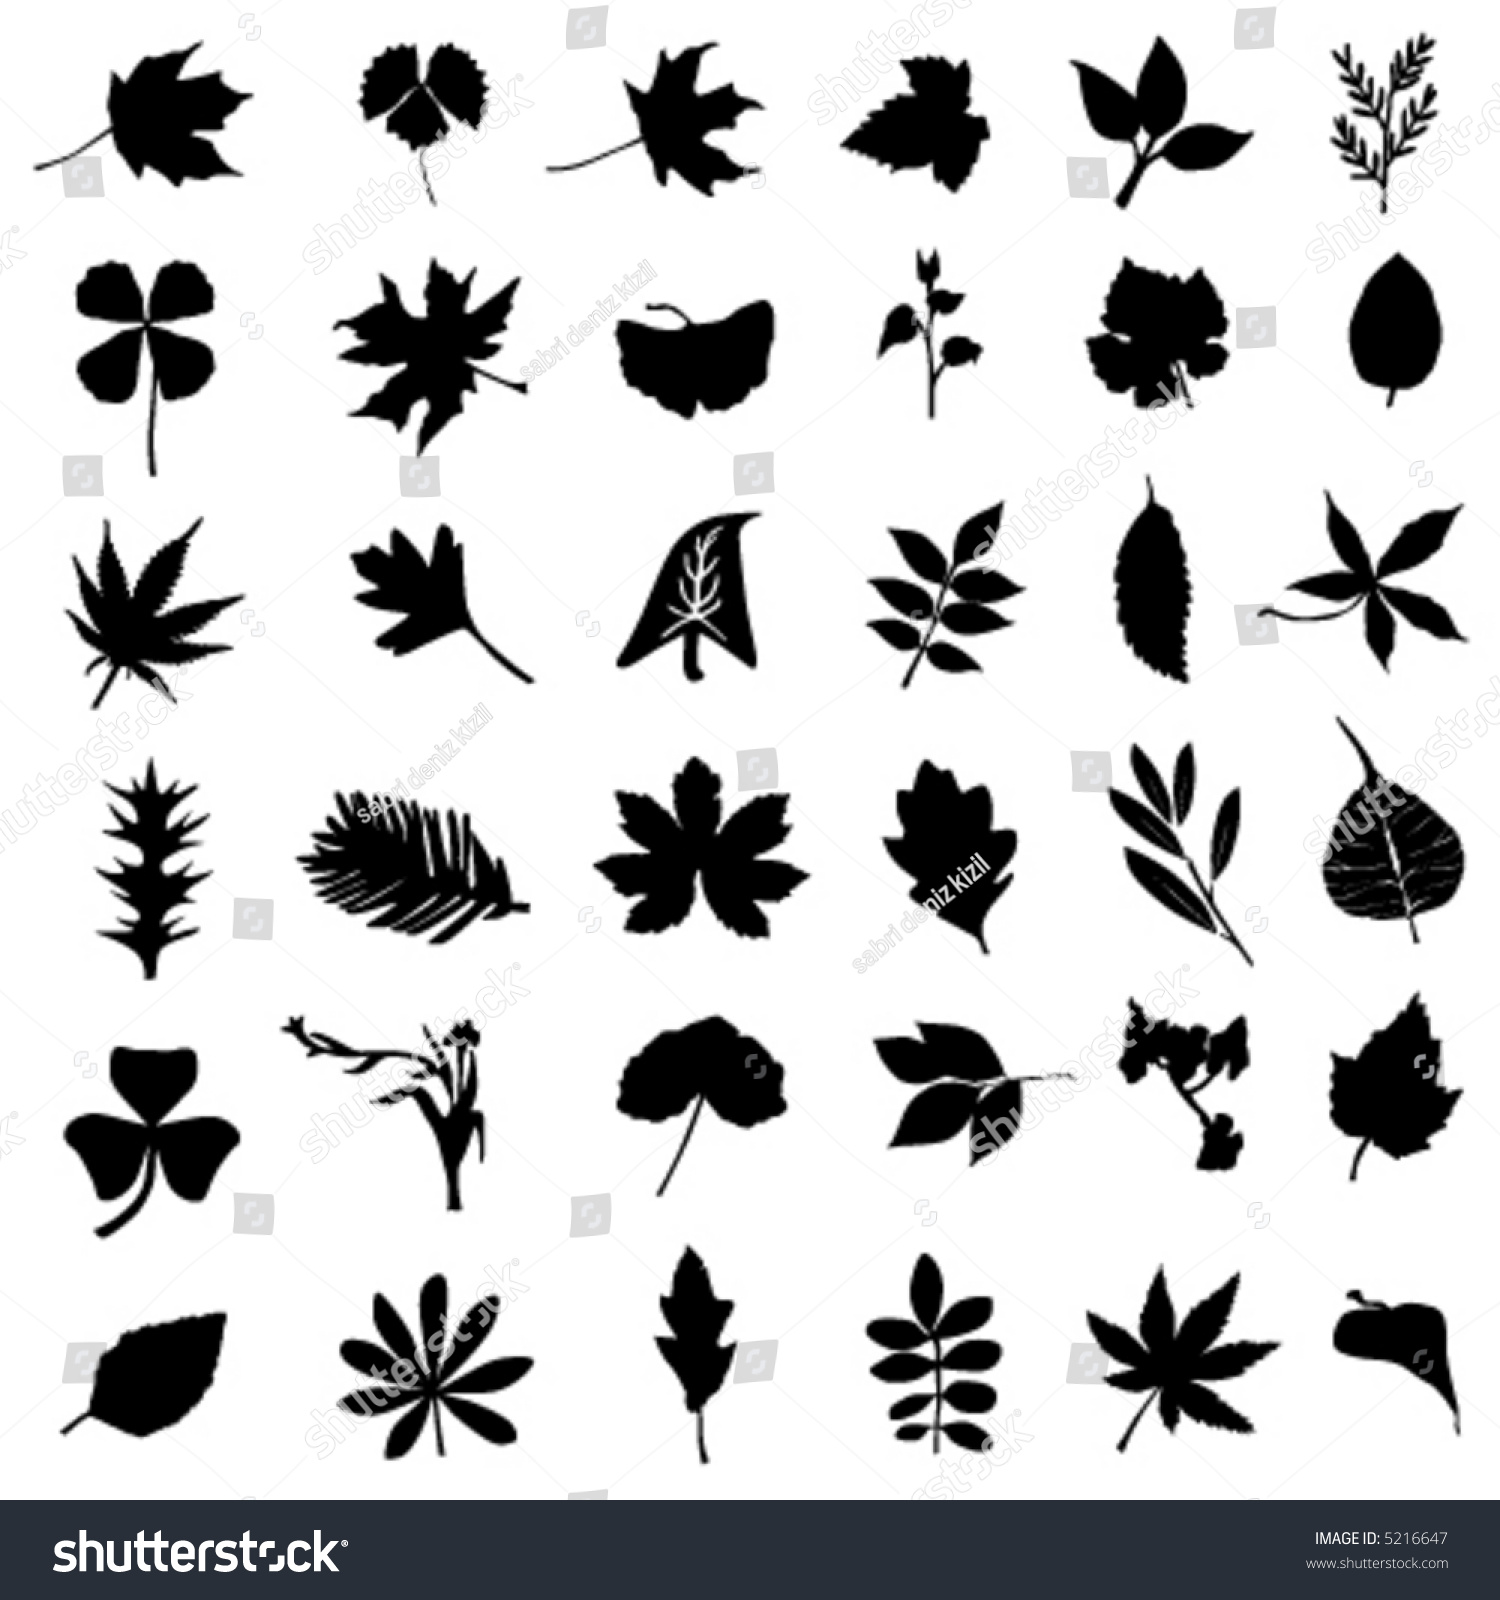 Collection Leaf Flower Vector Stock Vector 5216647 - Shutterstock